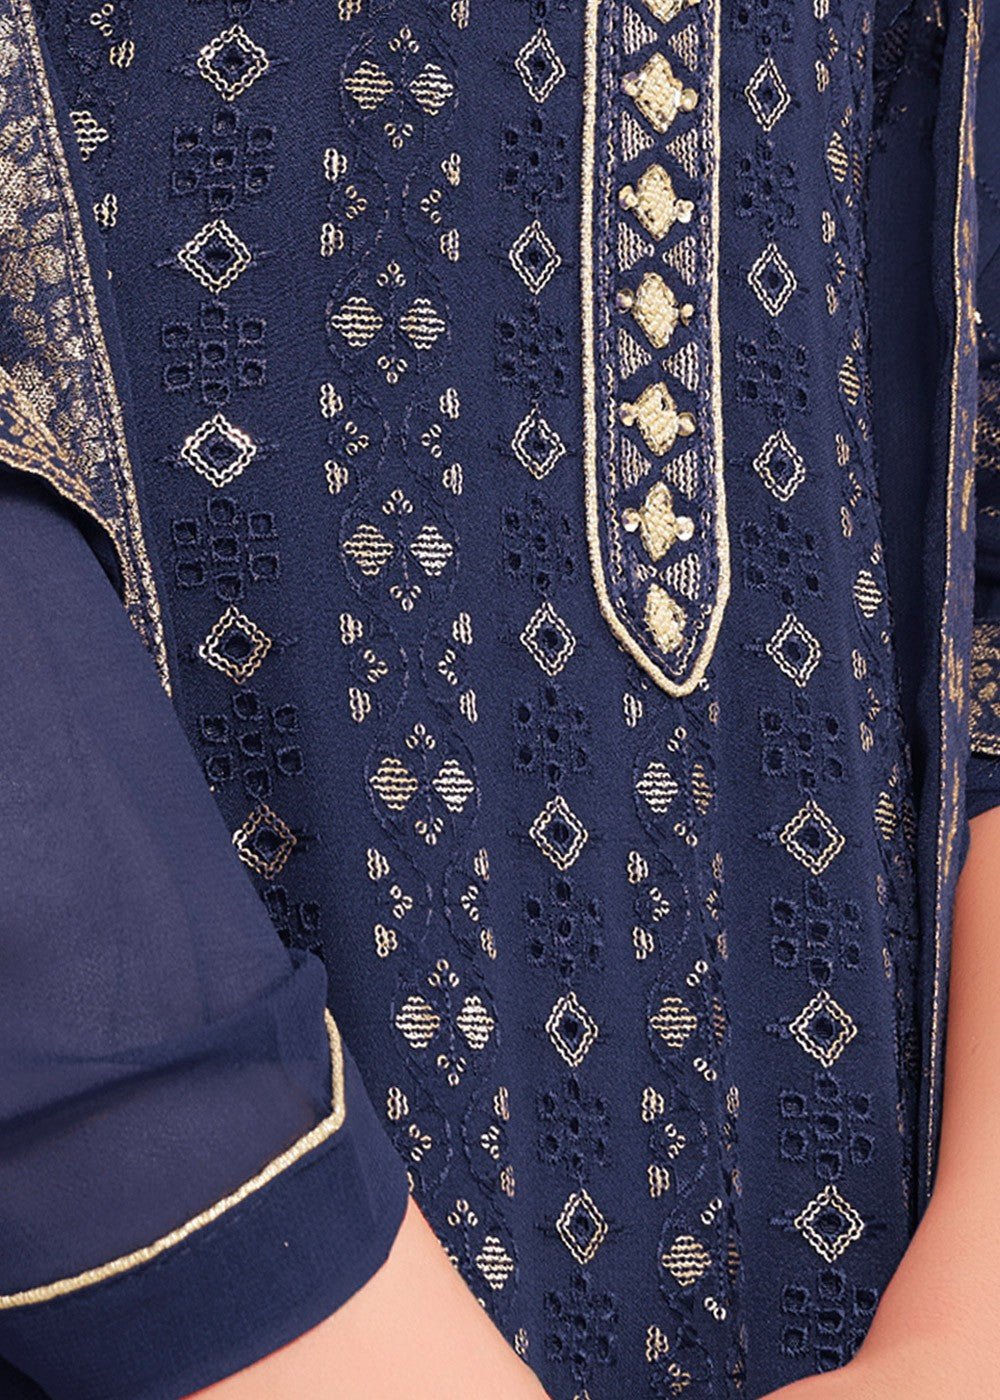 Buy Sequins Embroidered Blue Suit - Pakistani Style Salwar Suit